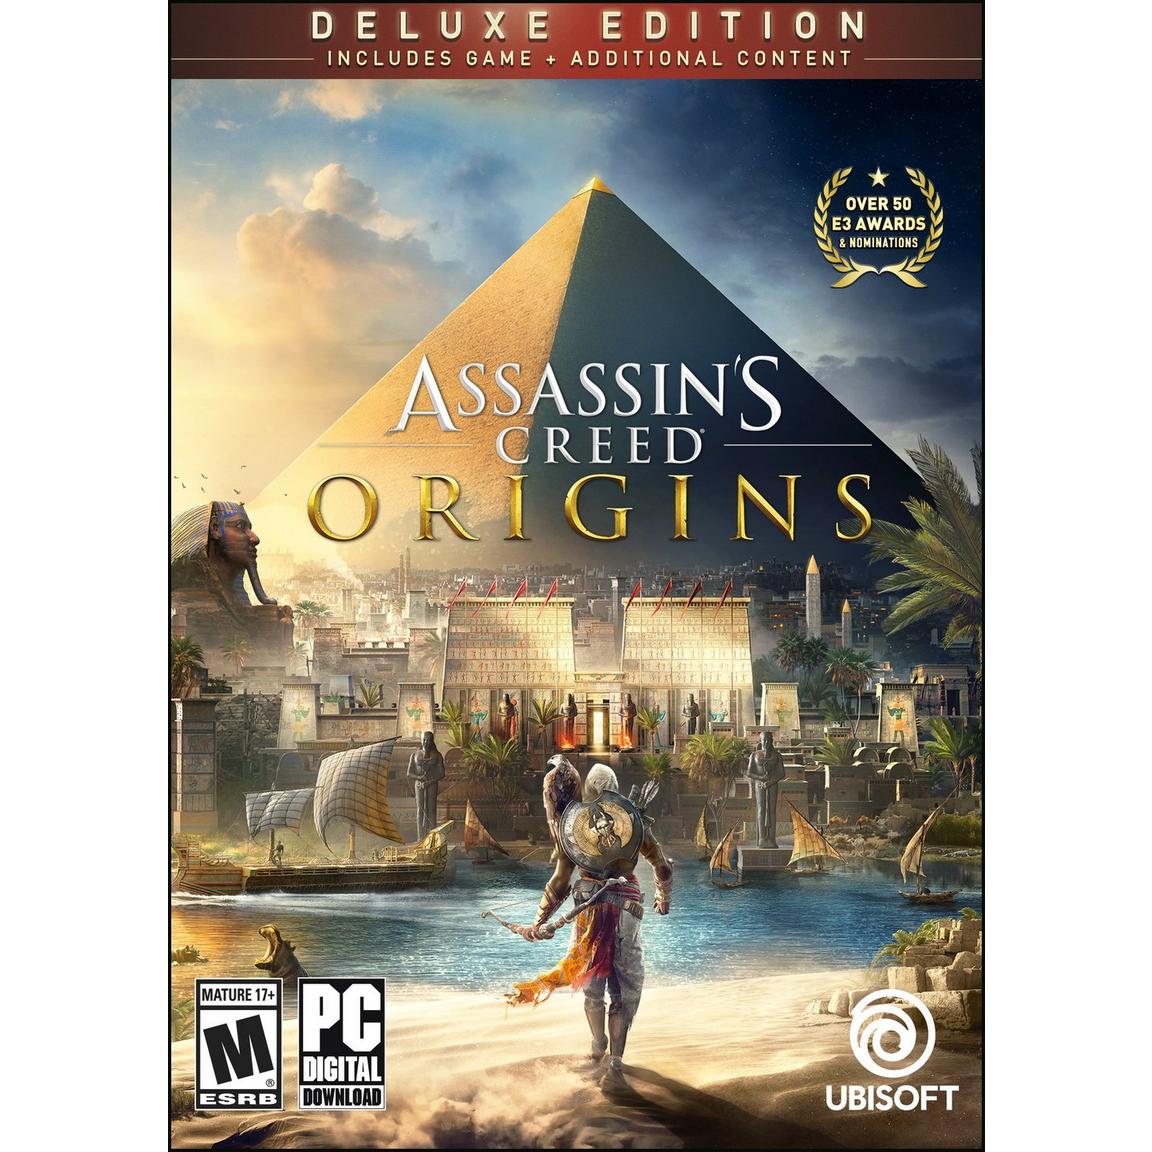 Assassin's Creed Origins Deluxe Edition - PC -  Ubisoft, GS150419